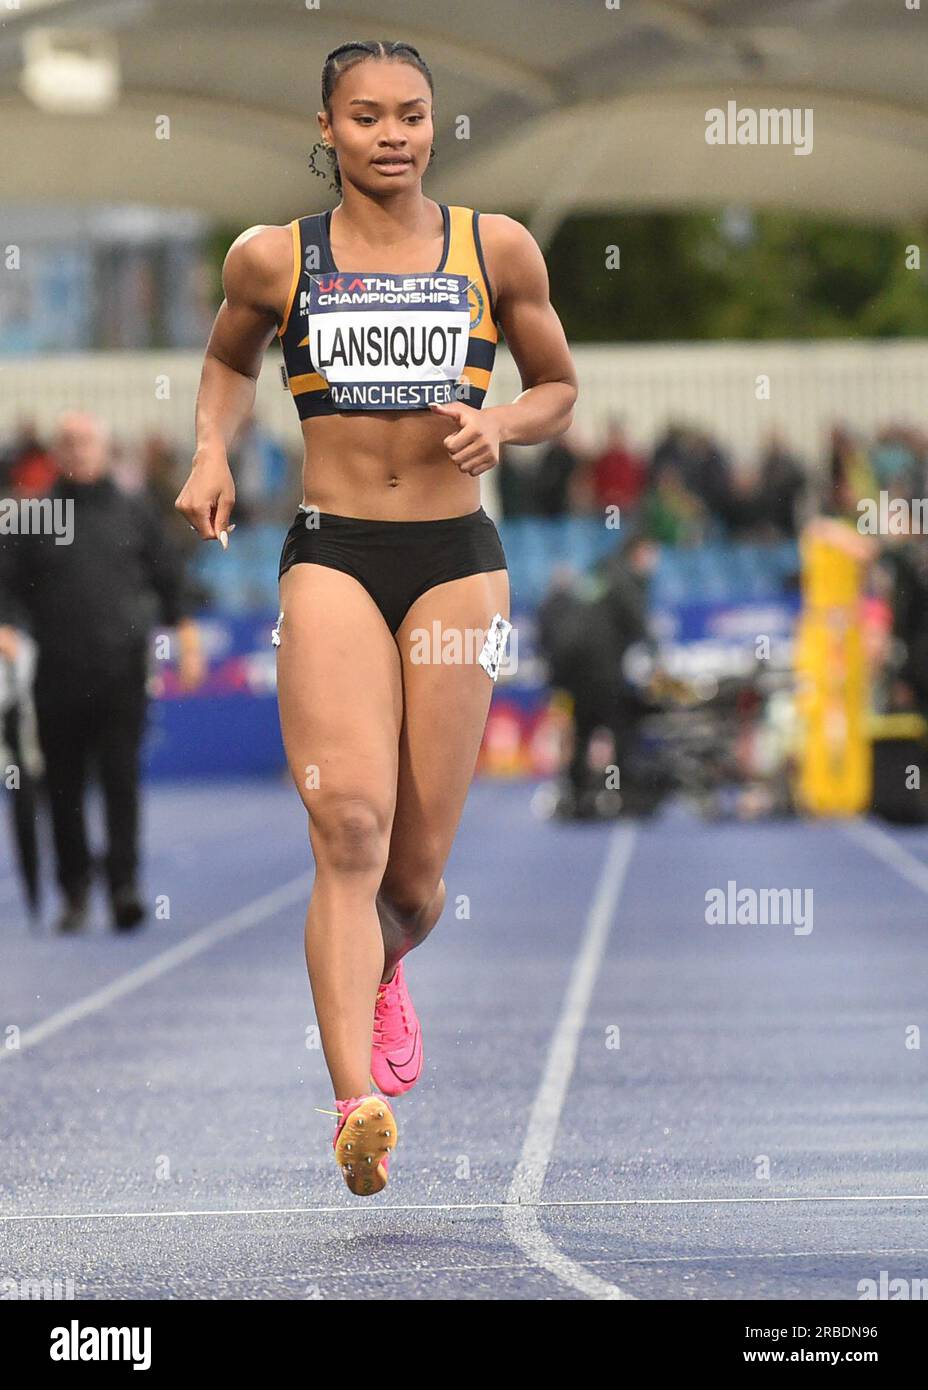 Manchester Regional Arena, Manchester, UK.  National UK Athletics Championships 2023.  Caption: LANSIQUOT Imani Womens 100 Meters  Picture: Mark Dunn/Alamy Live News (Sport) Credit: Mark Dunn Photography/Alamy Live News Stock Photo